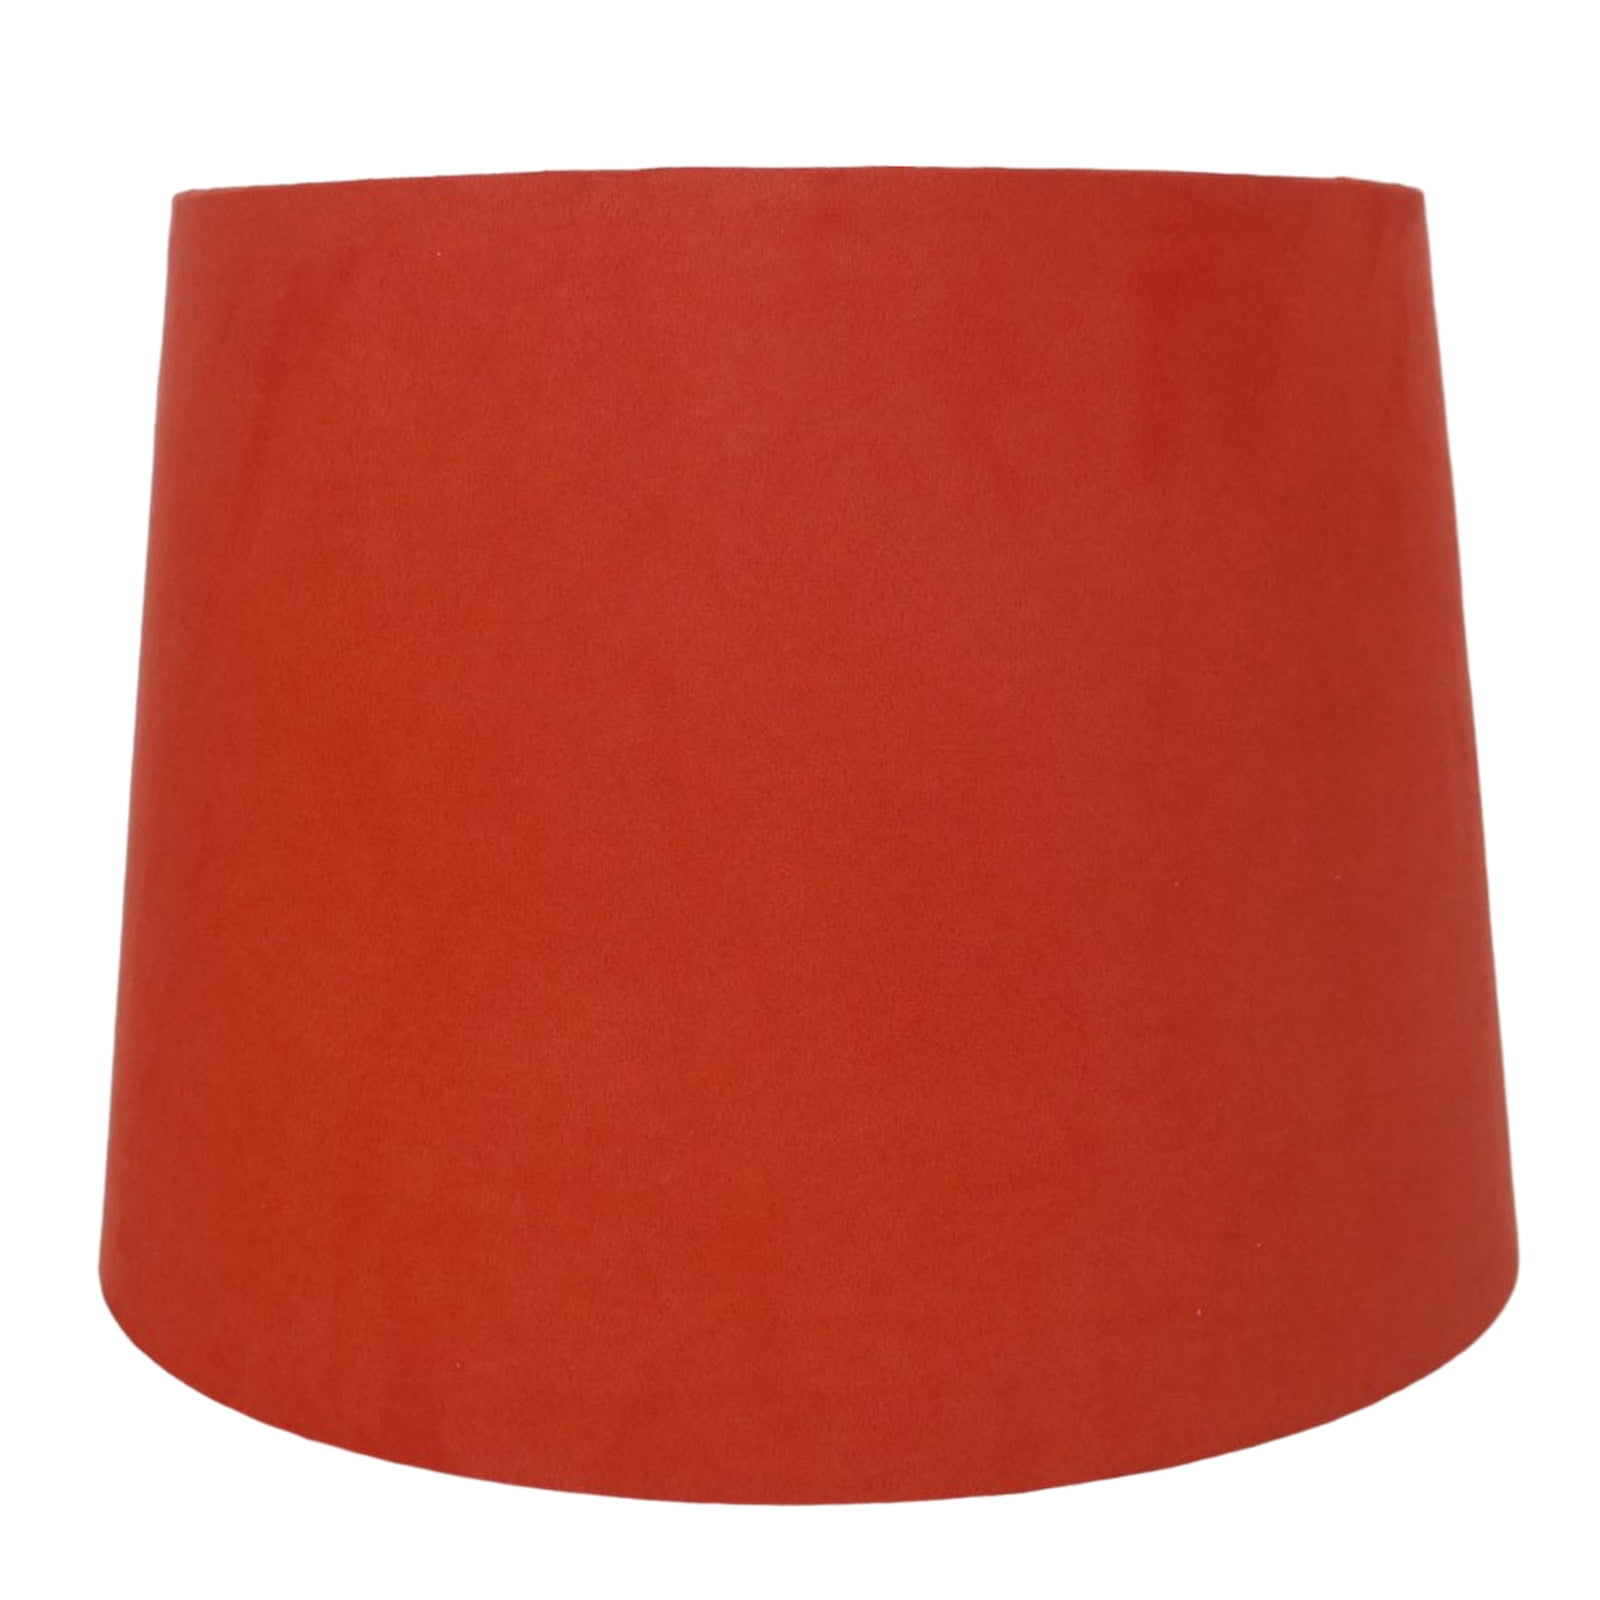 Viewamoon Red Maple Lamp Shades for Floor Lamps 13.58x13.58x8.27 Inch  Barrel Lamp Shades Polyester Fabric Lamp Shades Easy Assembly Replacement